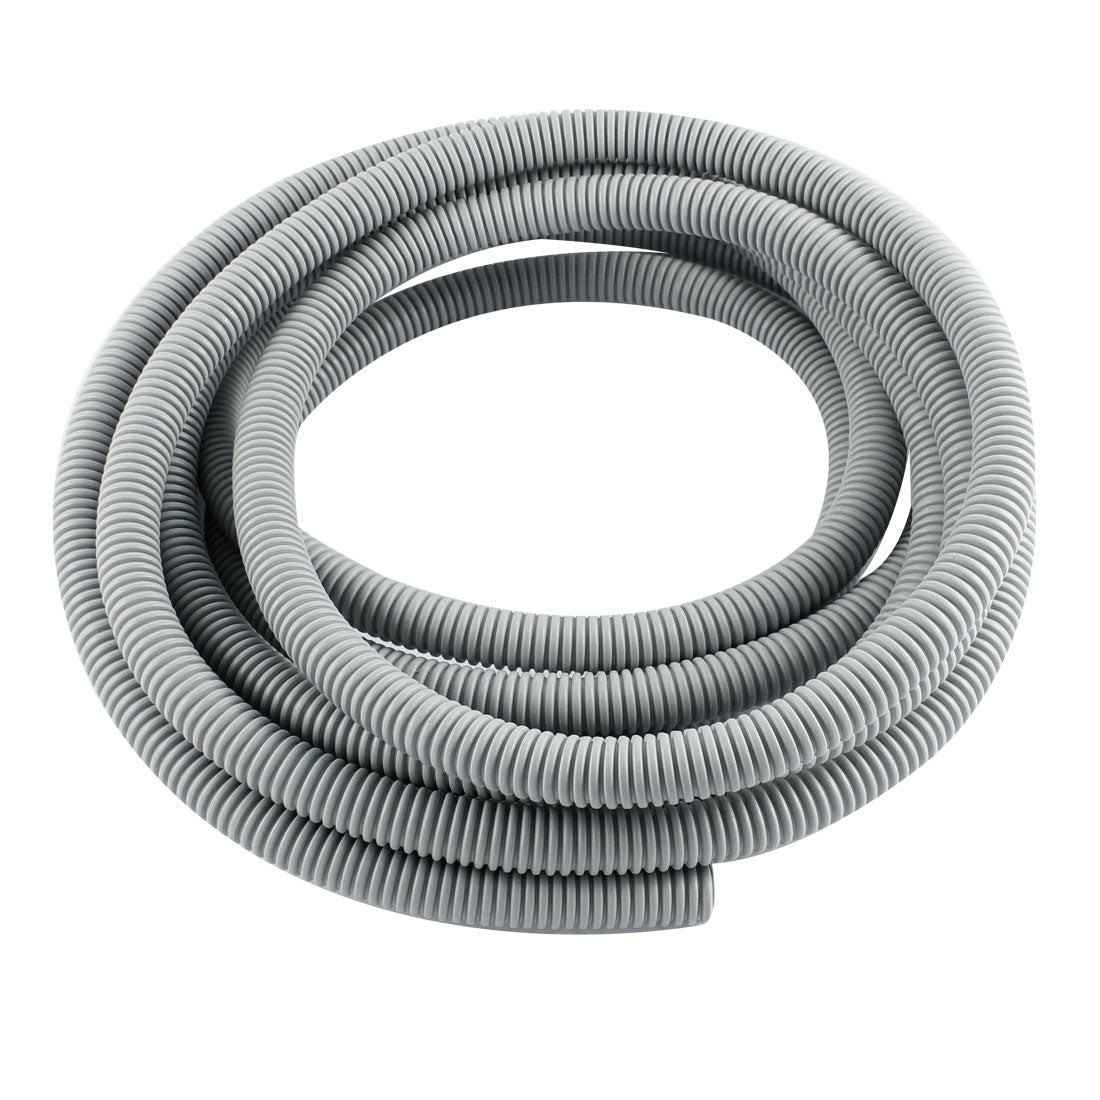 uxcell Uxcell 5 M 12 x 16 mm Plastic Flexible Corrugated Conduit Tube for Garden,Office Gray